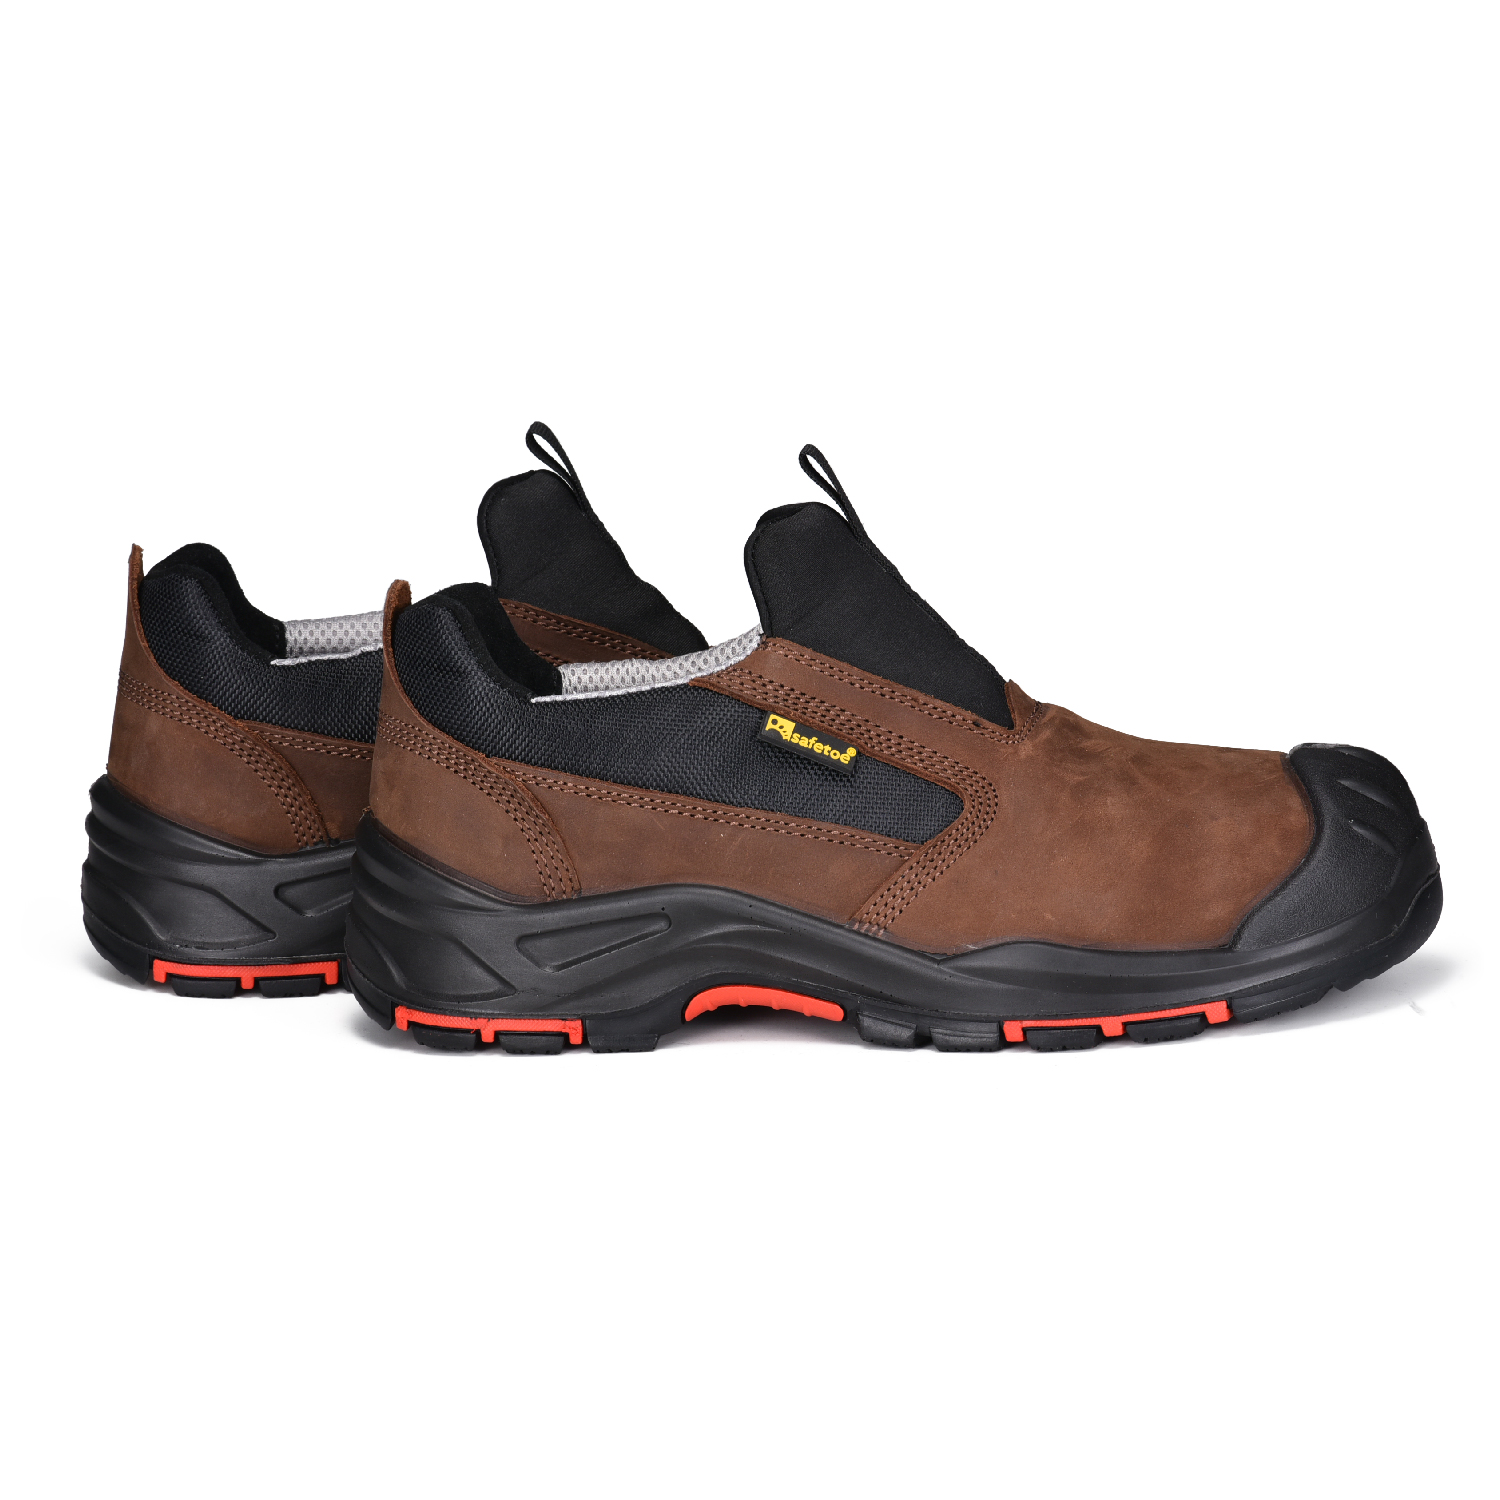 Superior Oil & Slip Resistant Metal Free Safety Work Shoes L-7525